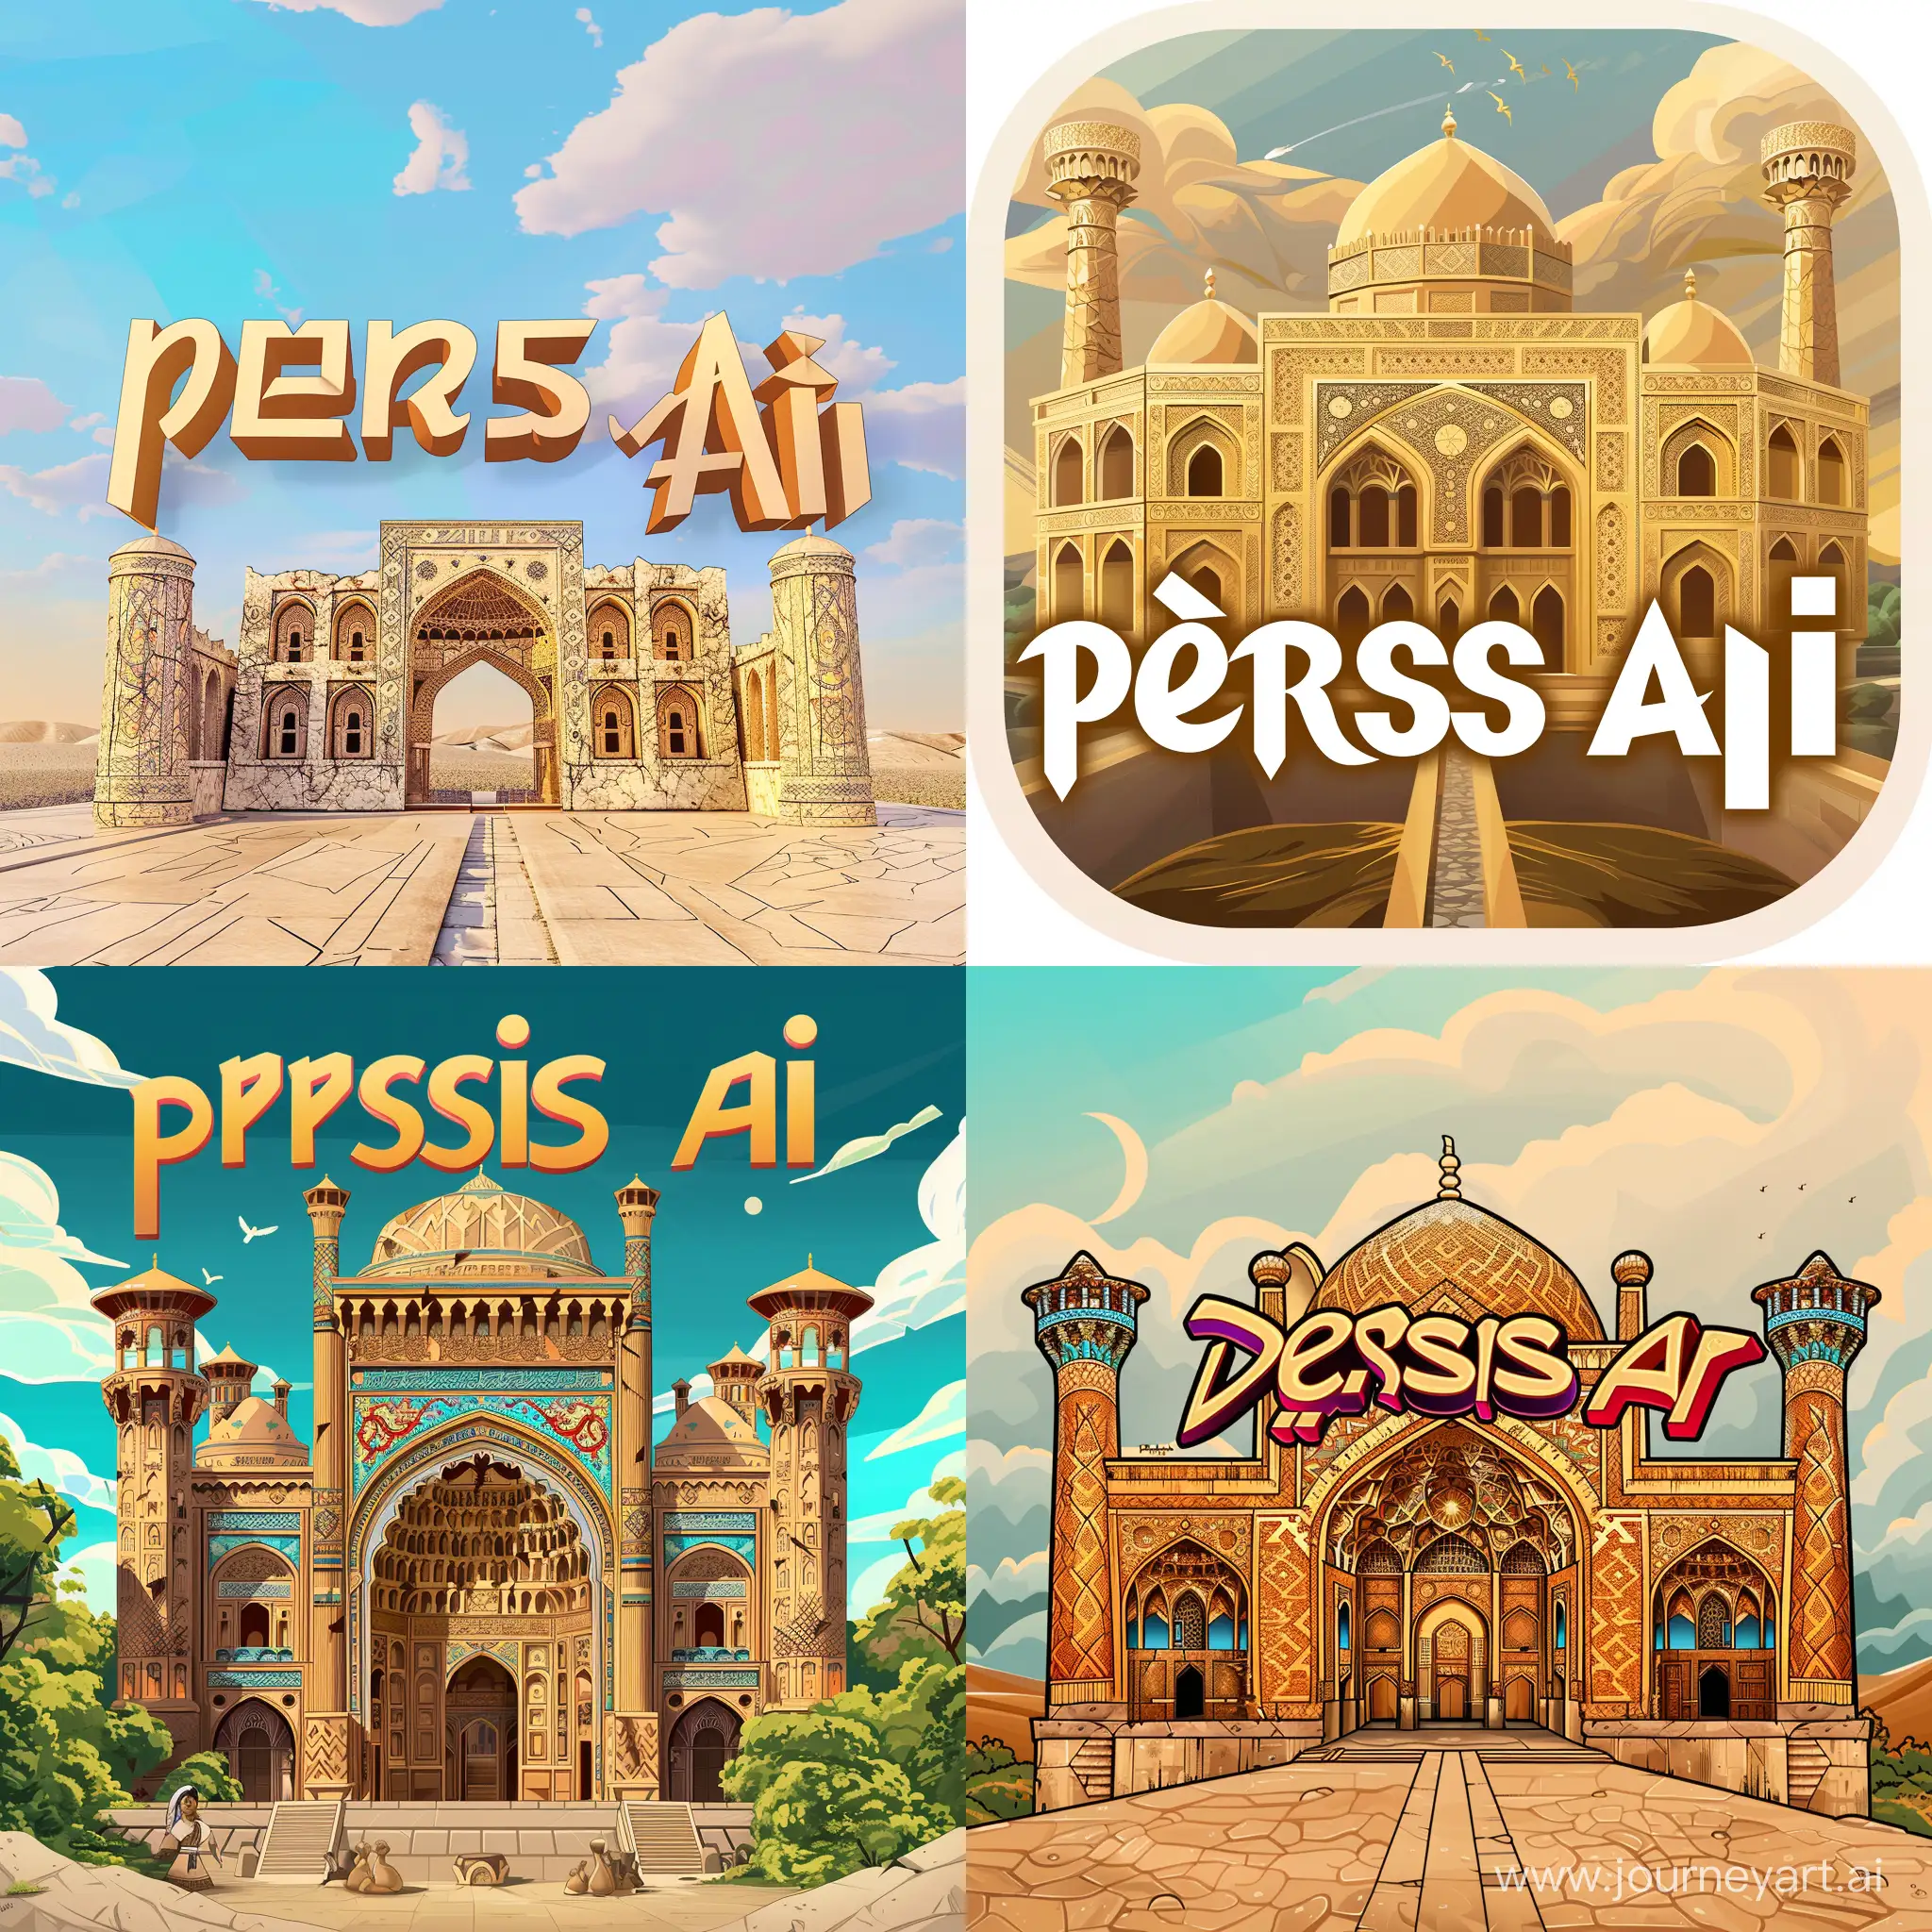 I want a logo for my YouTube channel named persis ai. I want this name to be three-dimensional and with the artistic texture of ancient Iran, and the background is Parse Palace in the form of a two-dimensional cartoon.